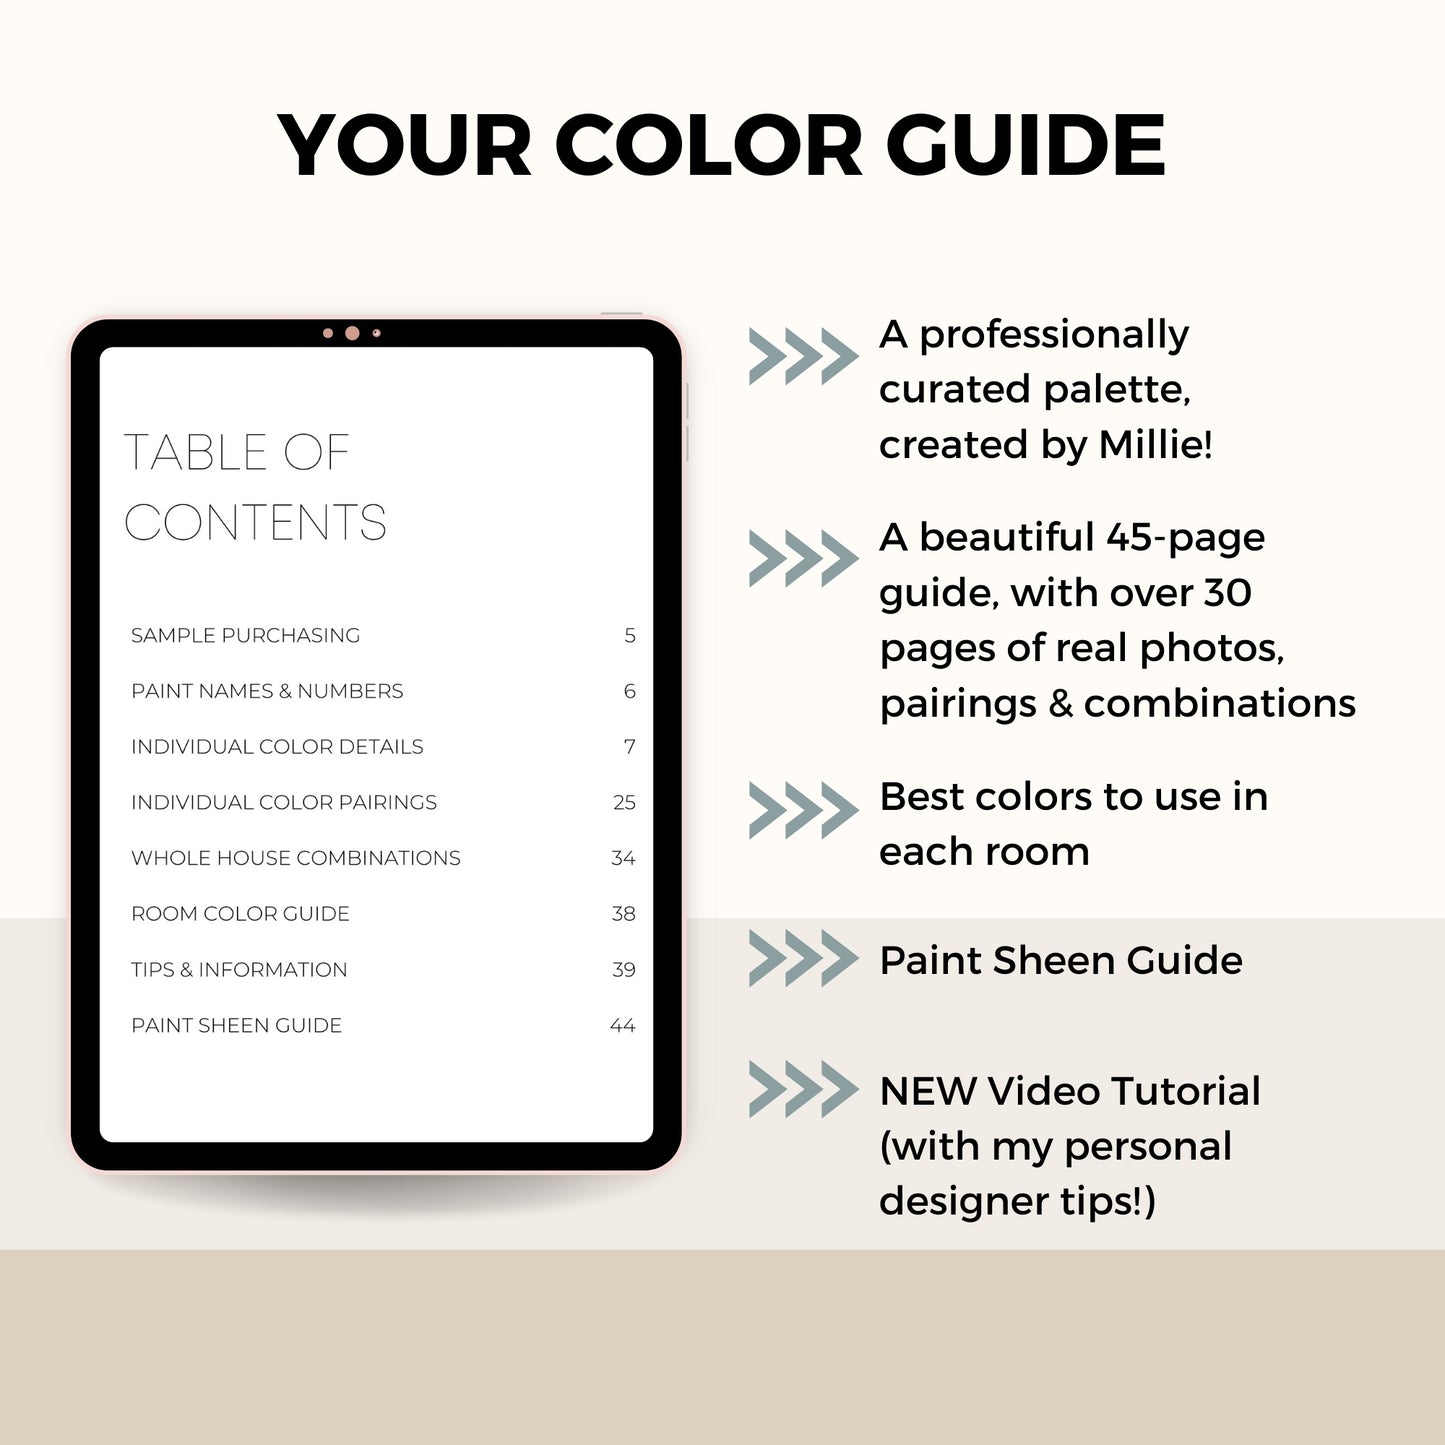 Upward Sherwin Williams Paint Palette, Interior Paint Colors for Home, 2024 Color of the Year, Coastal Colors, Pure White